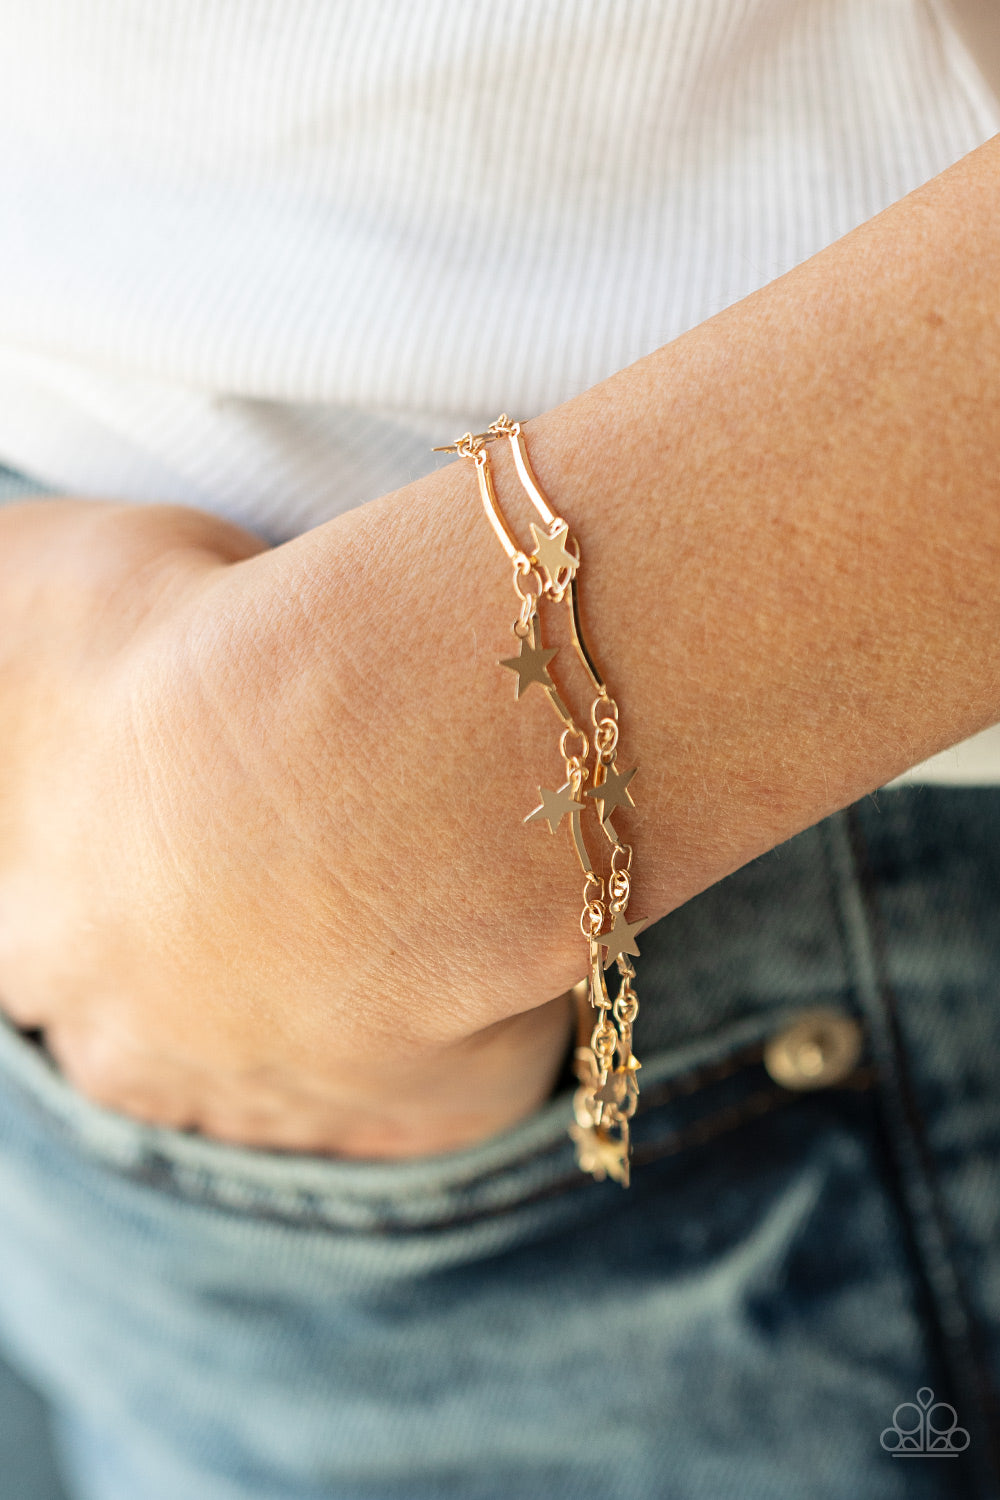 A collection of dainty gold stars and curved gold bars delicately connect around the wrist, creating a stellar fringe. Features an adjustable clasp closure.